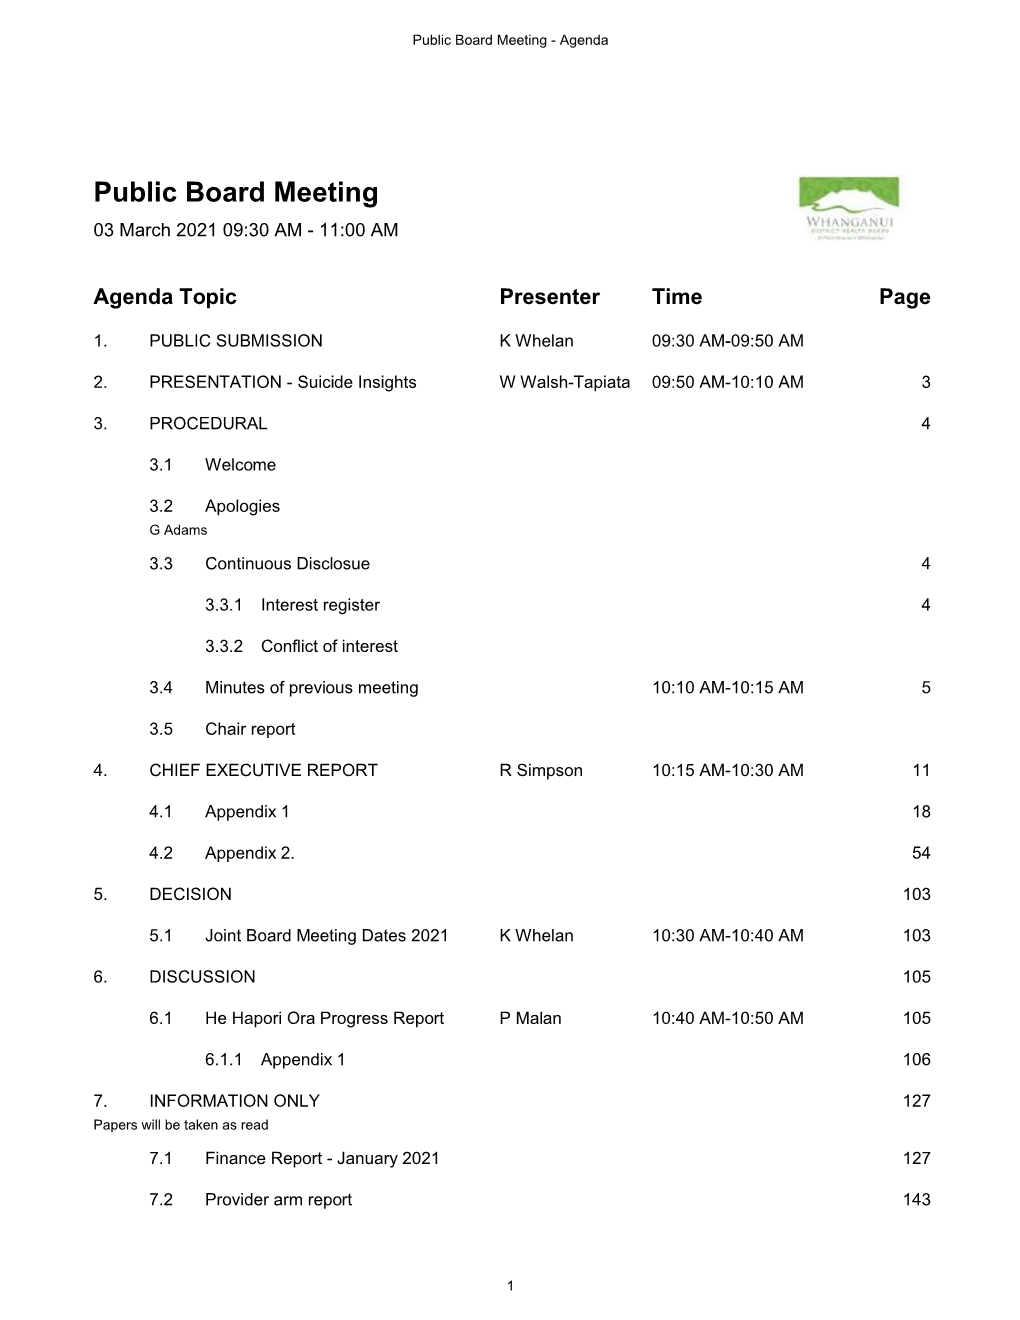 Meeting Documents 3 March 2021